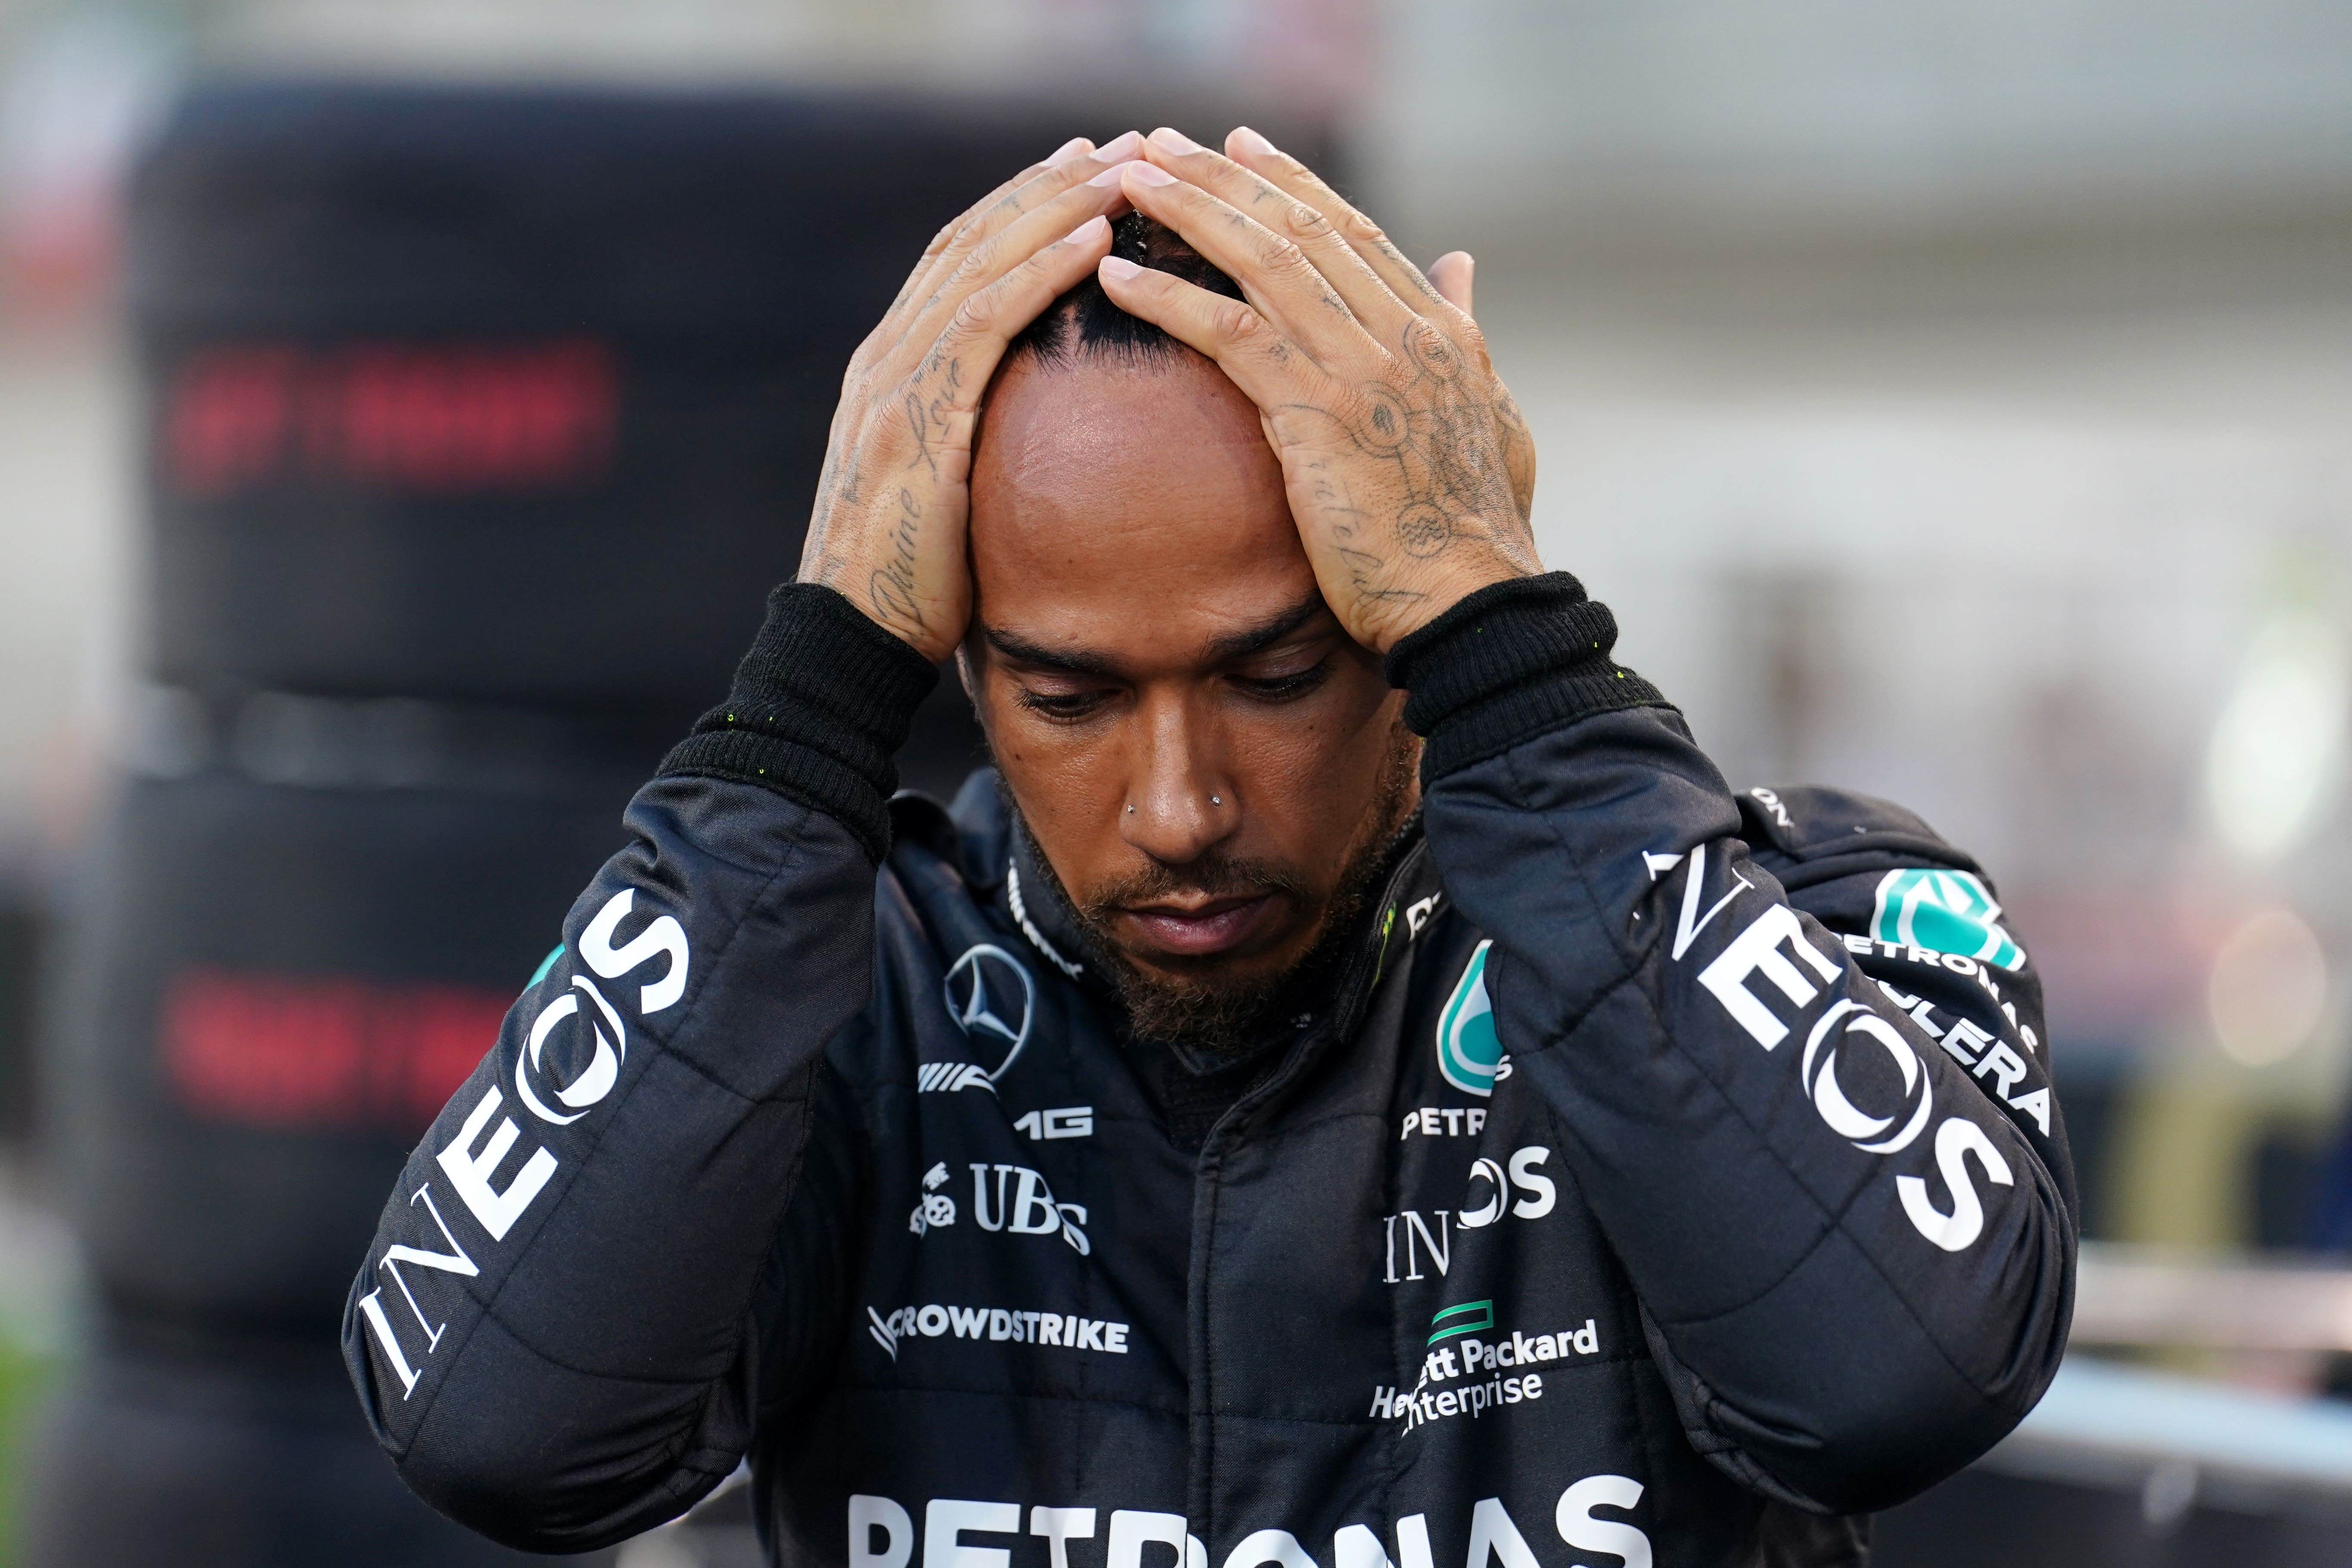 Lewis Hamilton insisted that ‘safety comes first’ after the race was cancelled